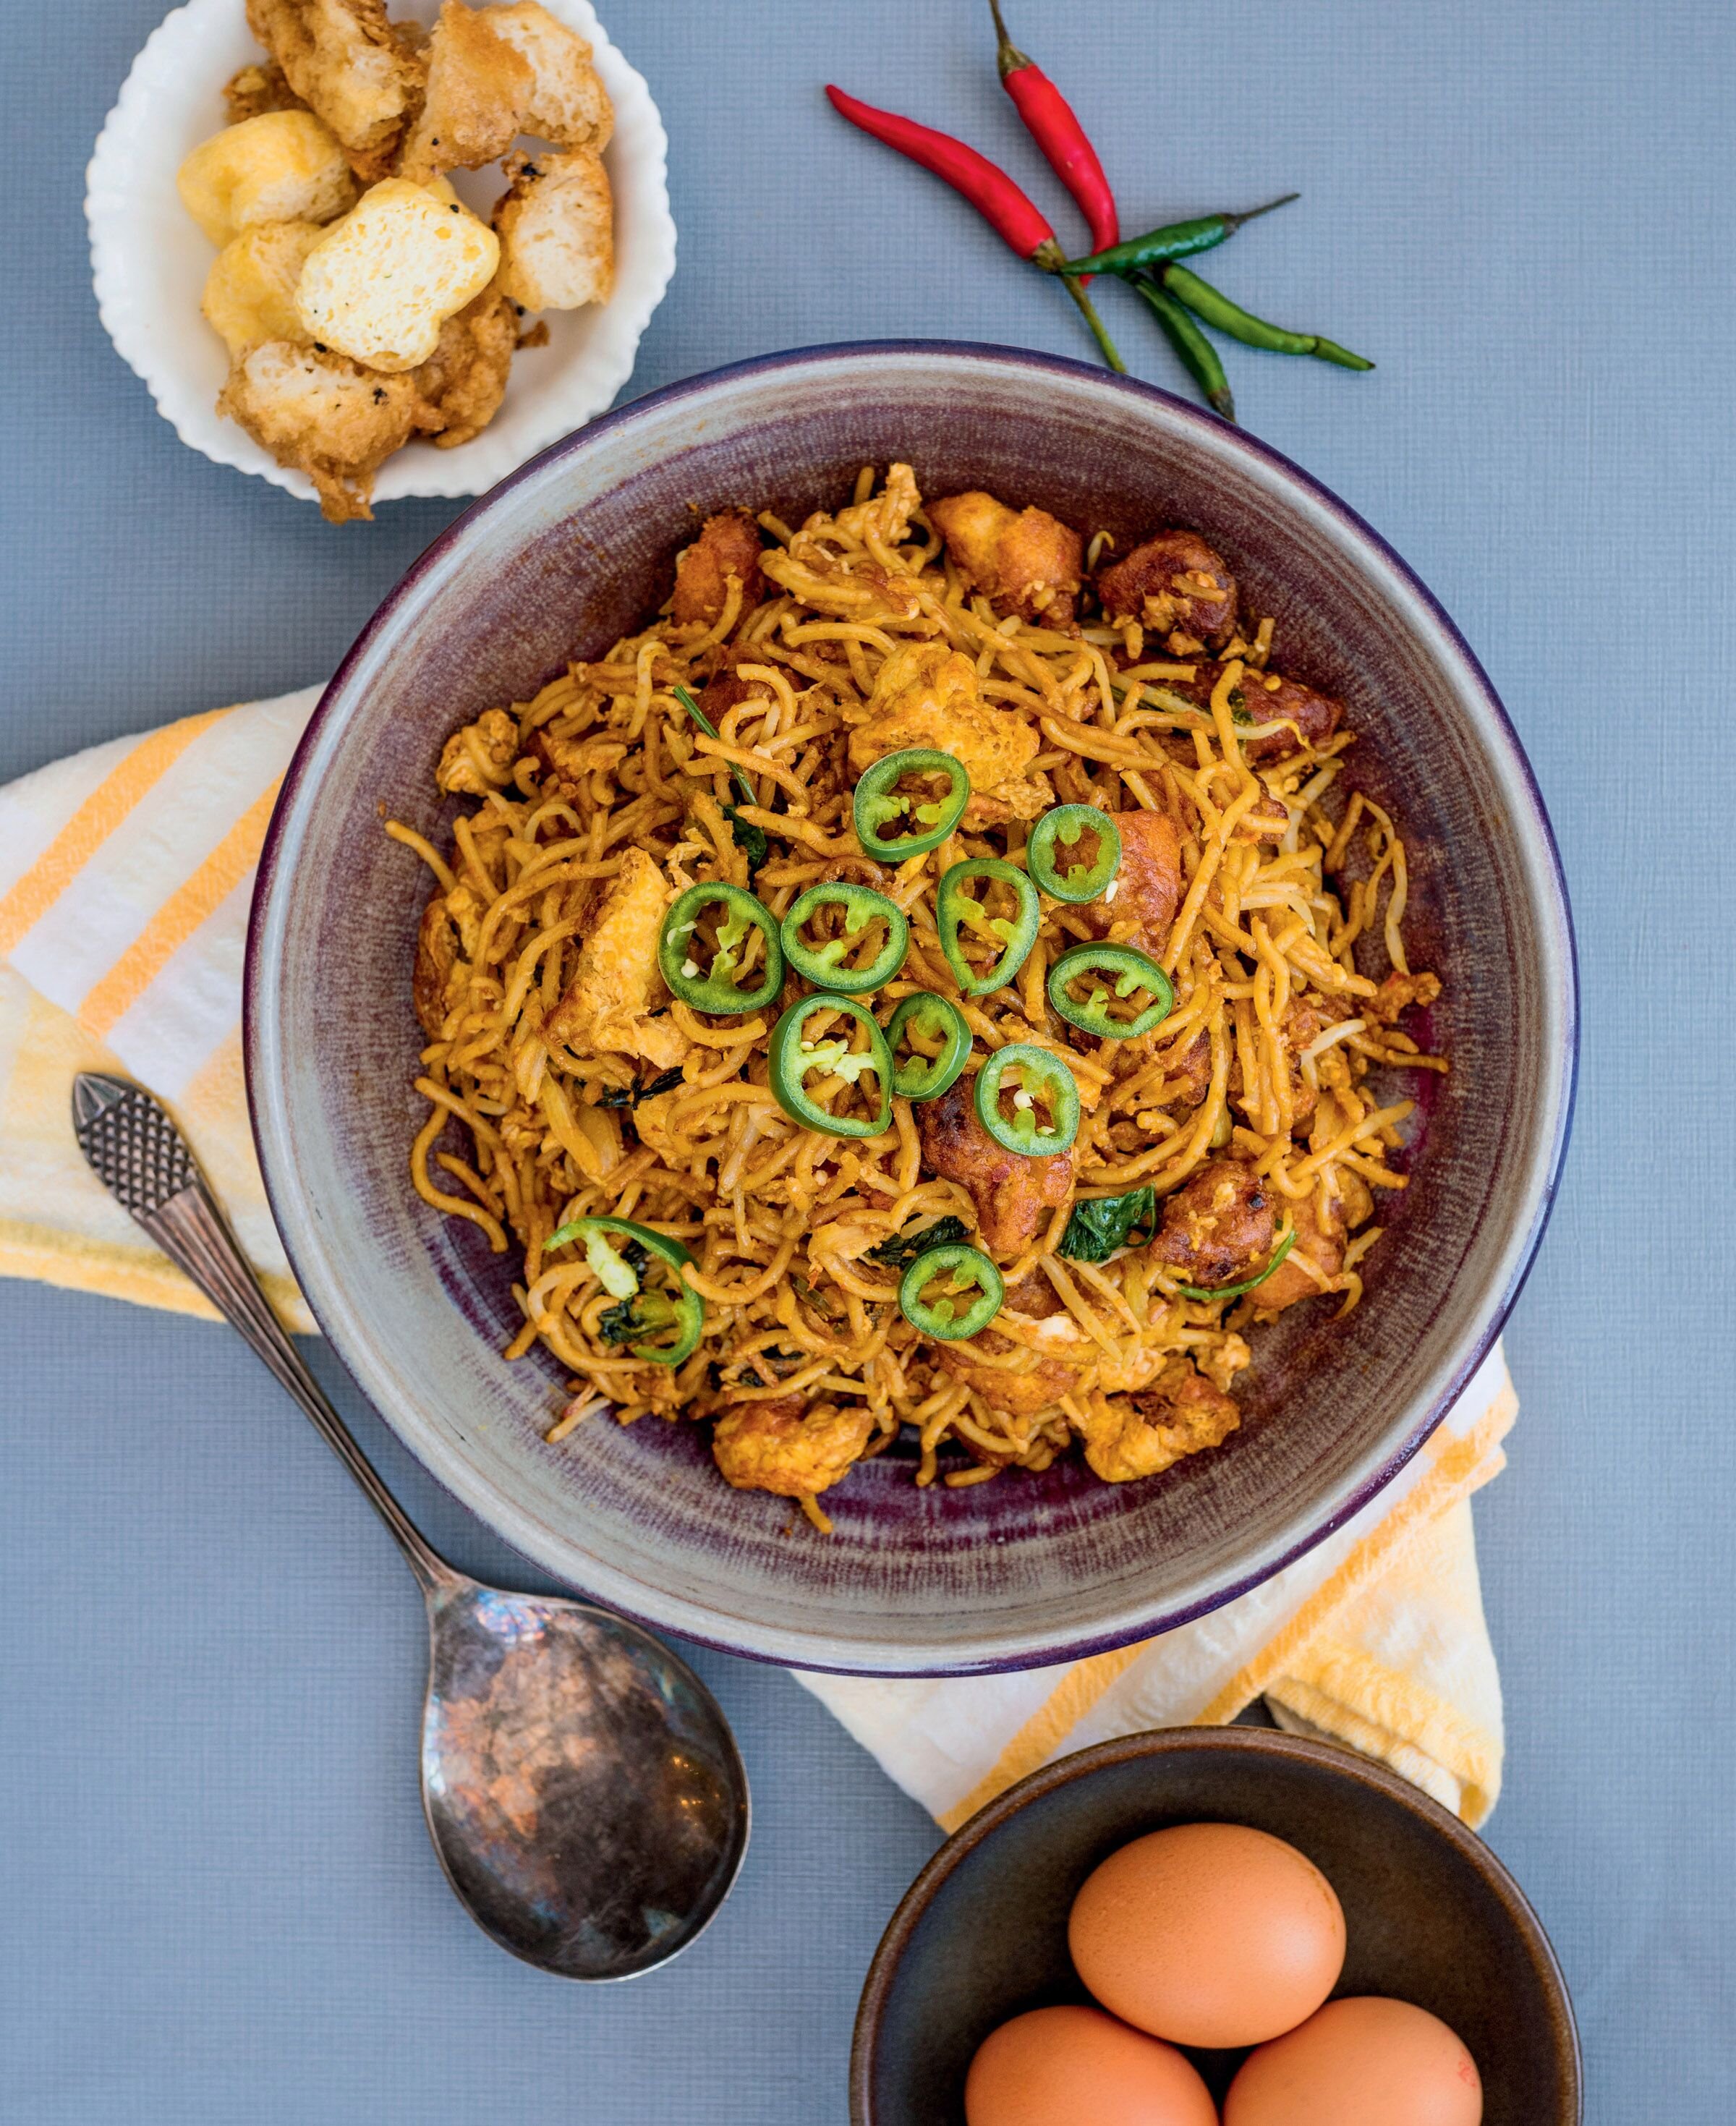 Zaleha Olpin’s recipe for Mee Goreng Mamak is ideal with a cup of sweet milky tea.